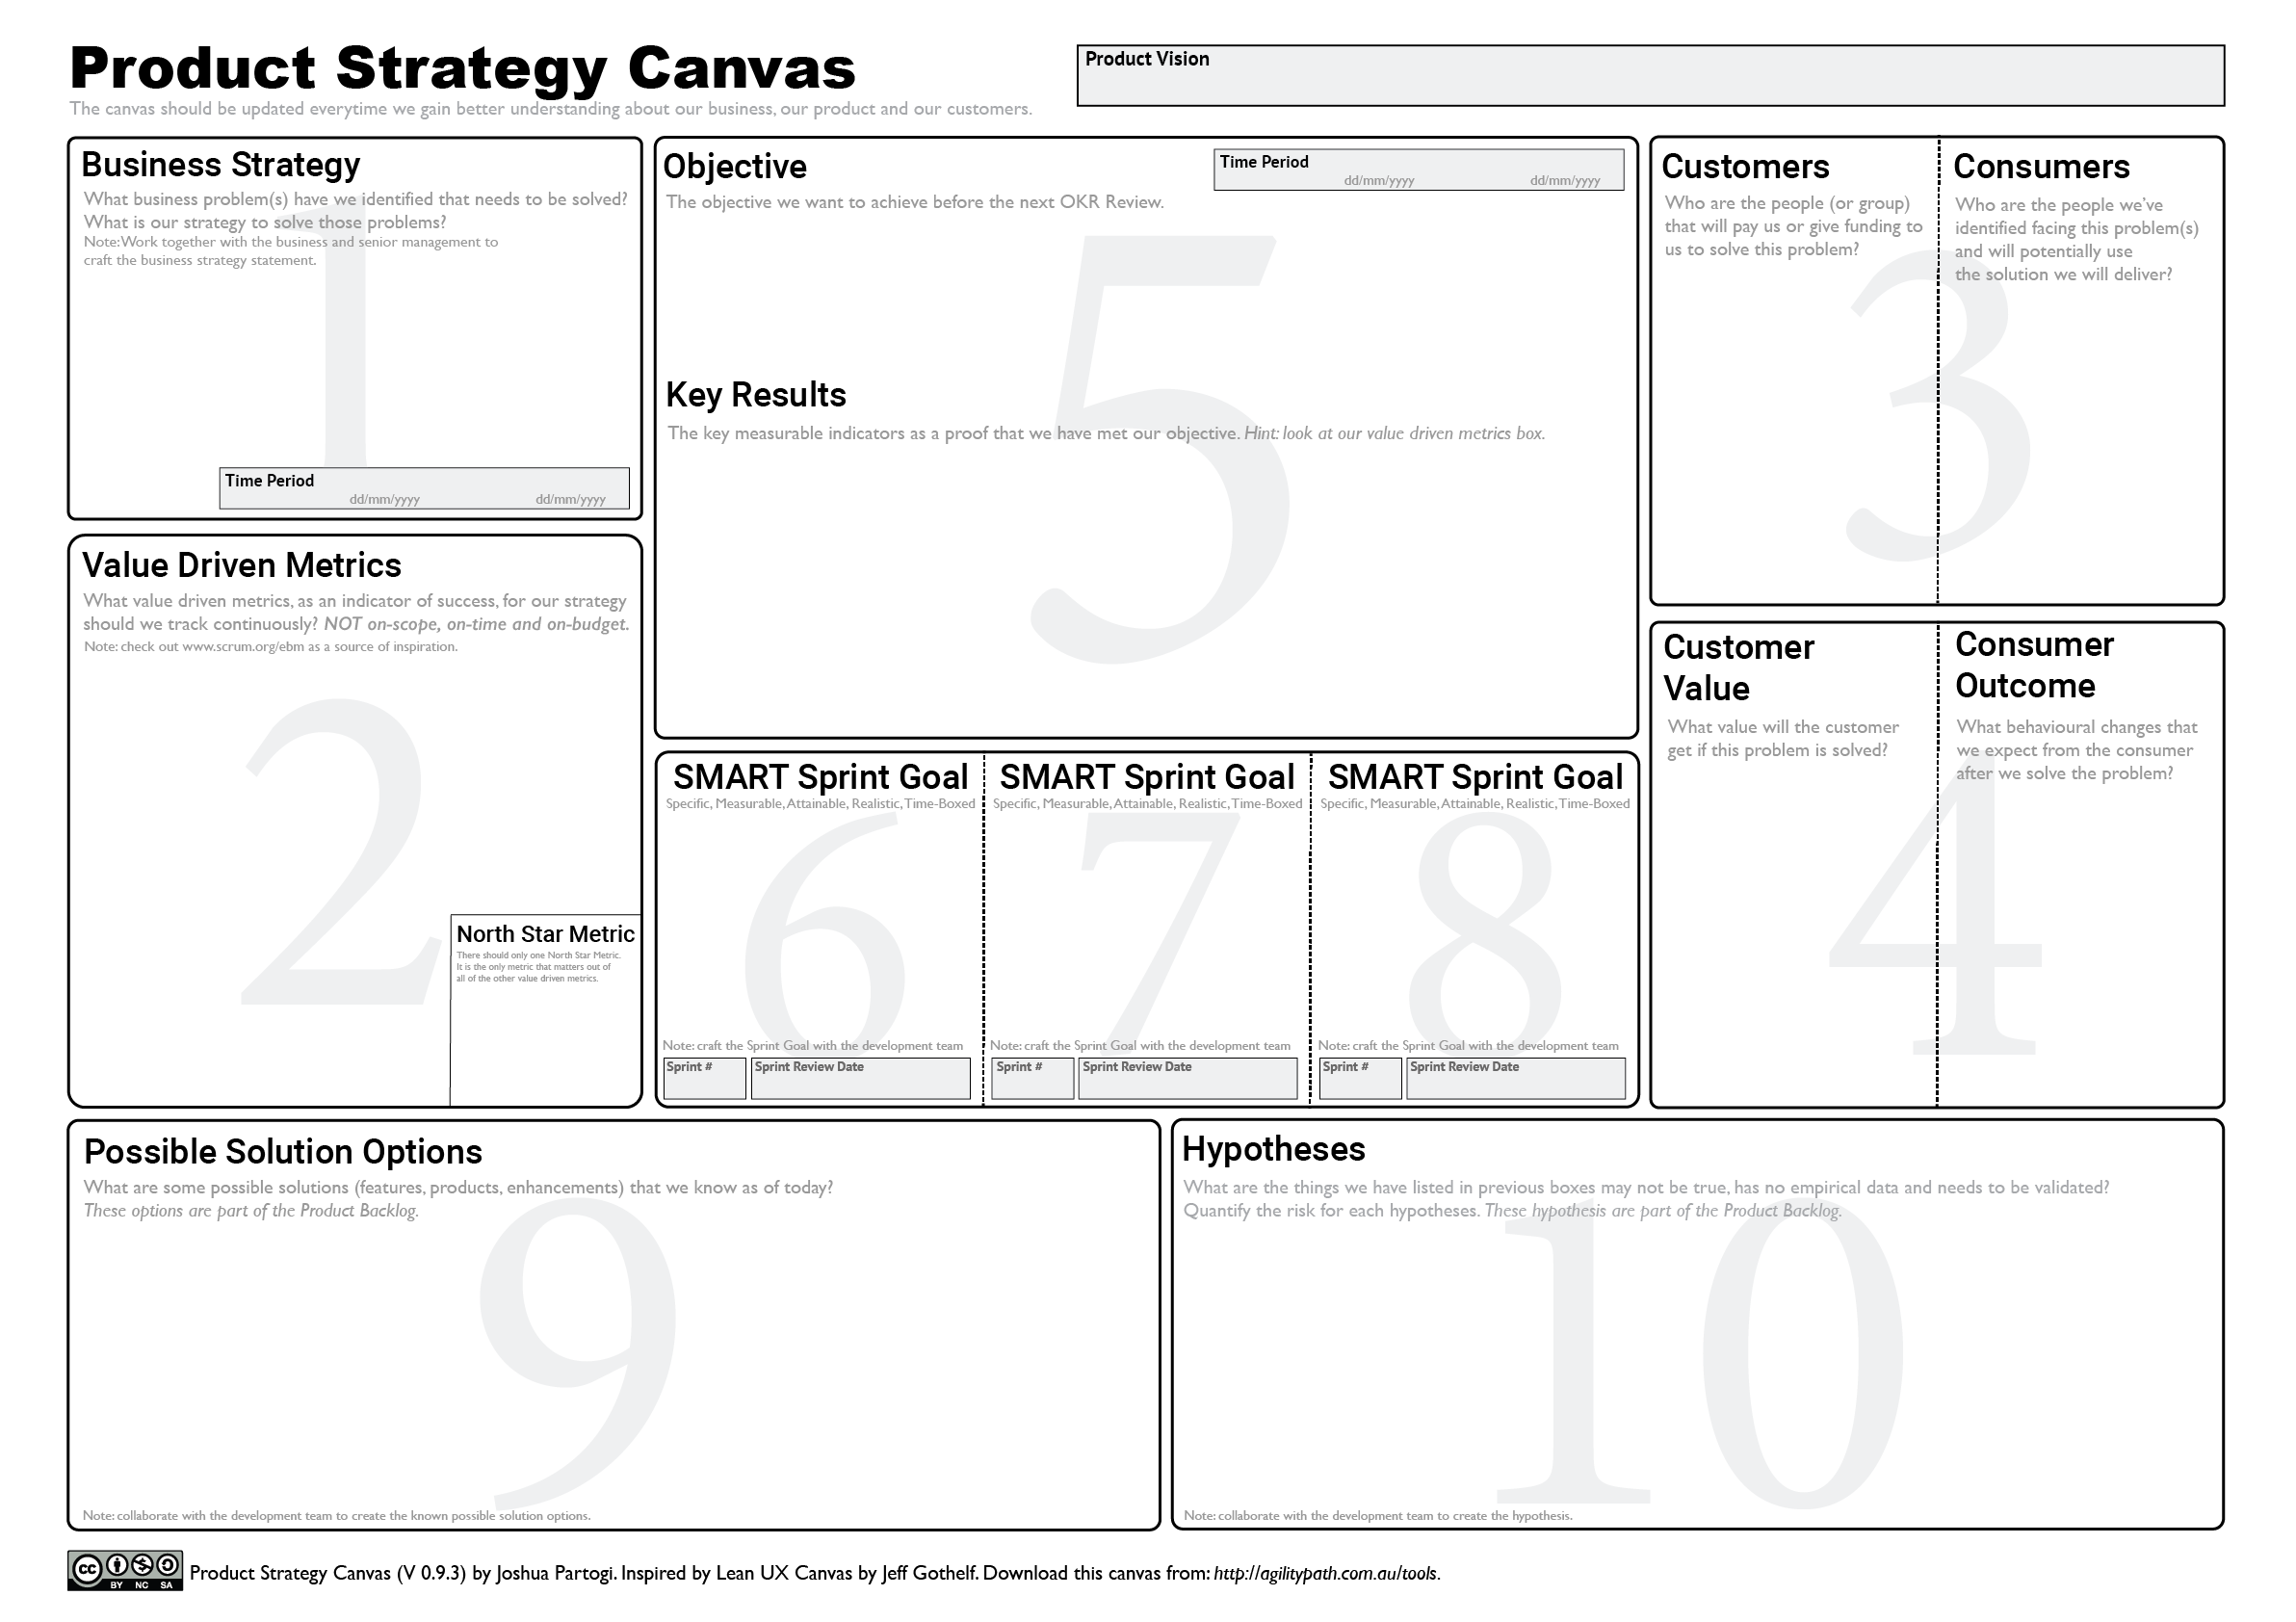 How To Align Your Product Strategy Using The Product Strategy Canvas 